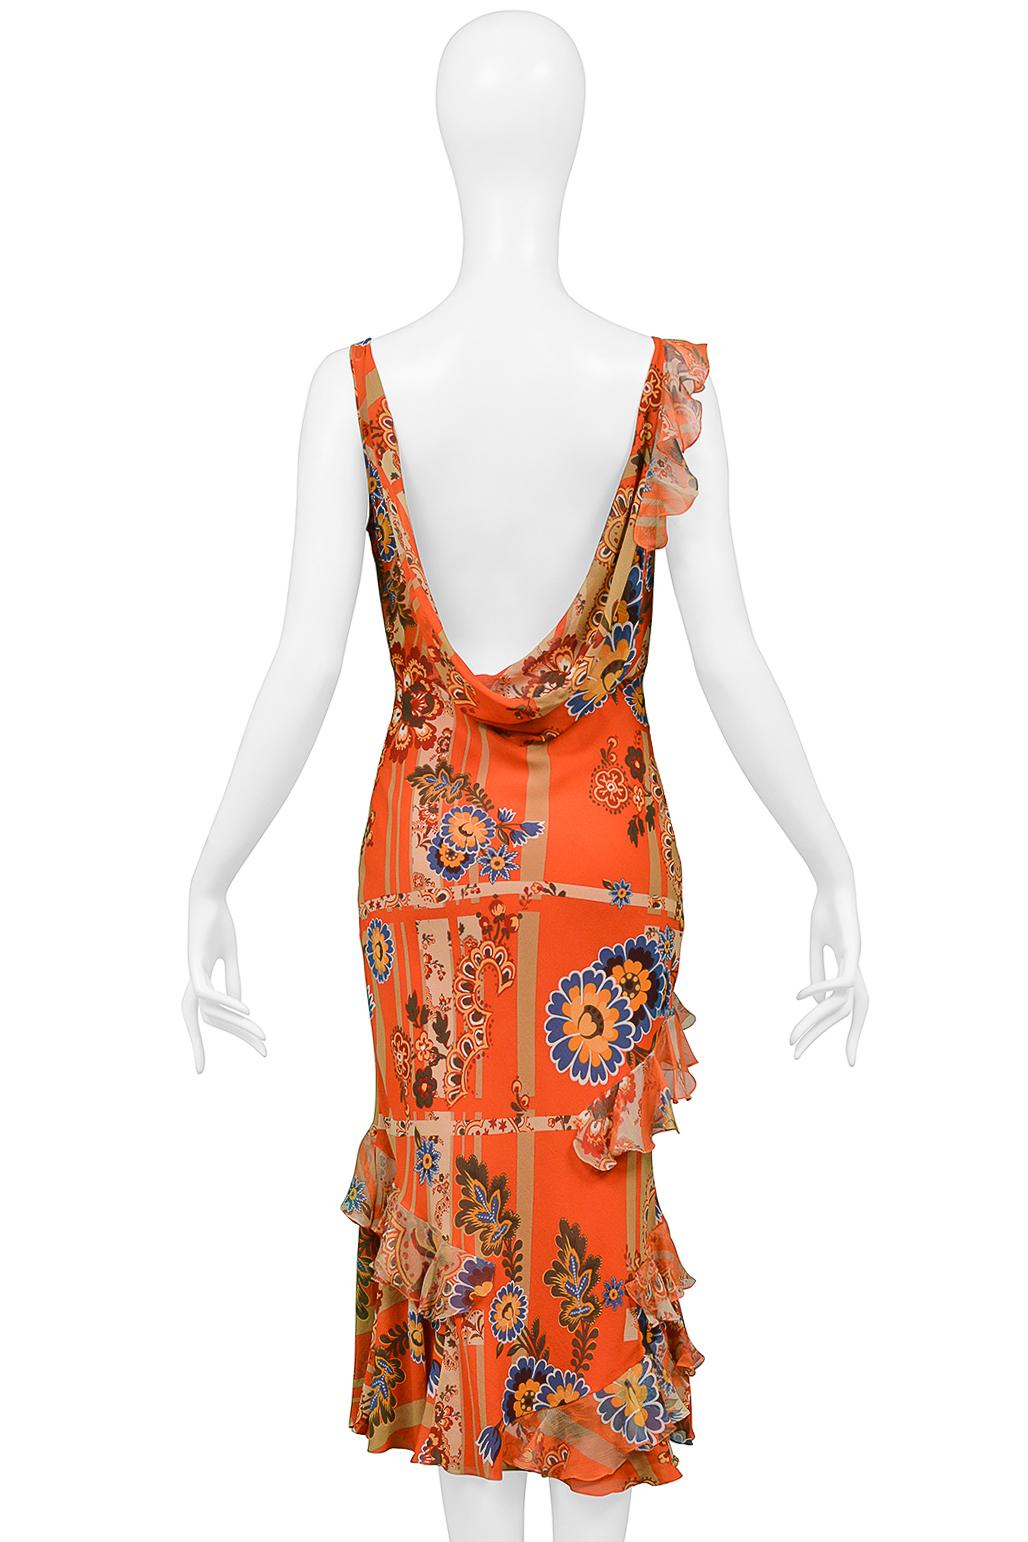 John Galliano Orange Floral Dress With Ruffles And Open Back 2004 1